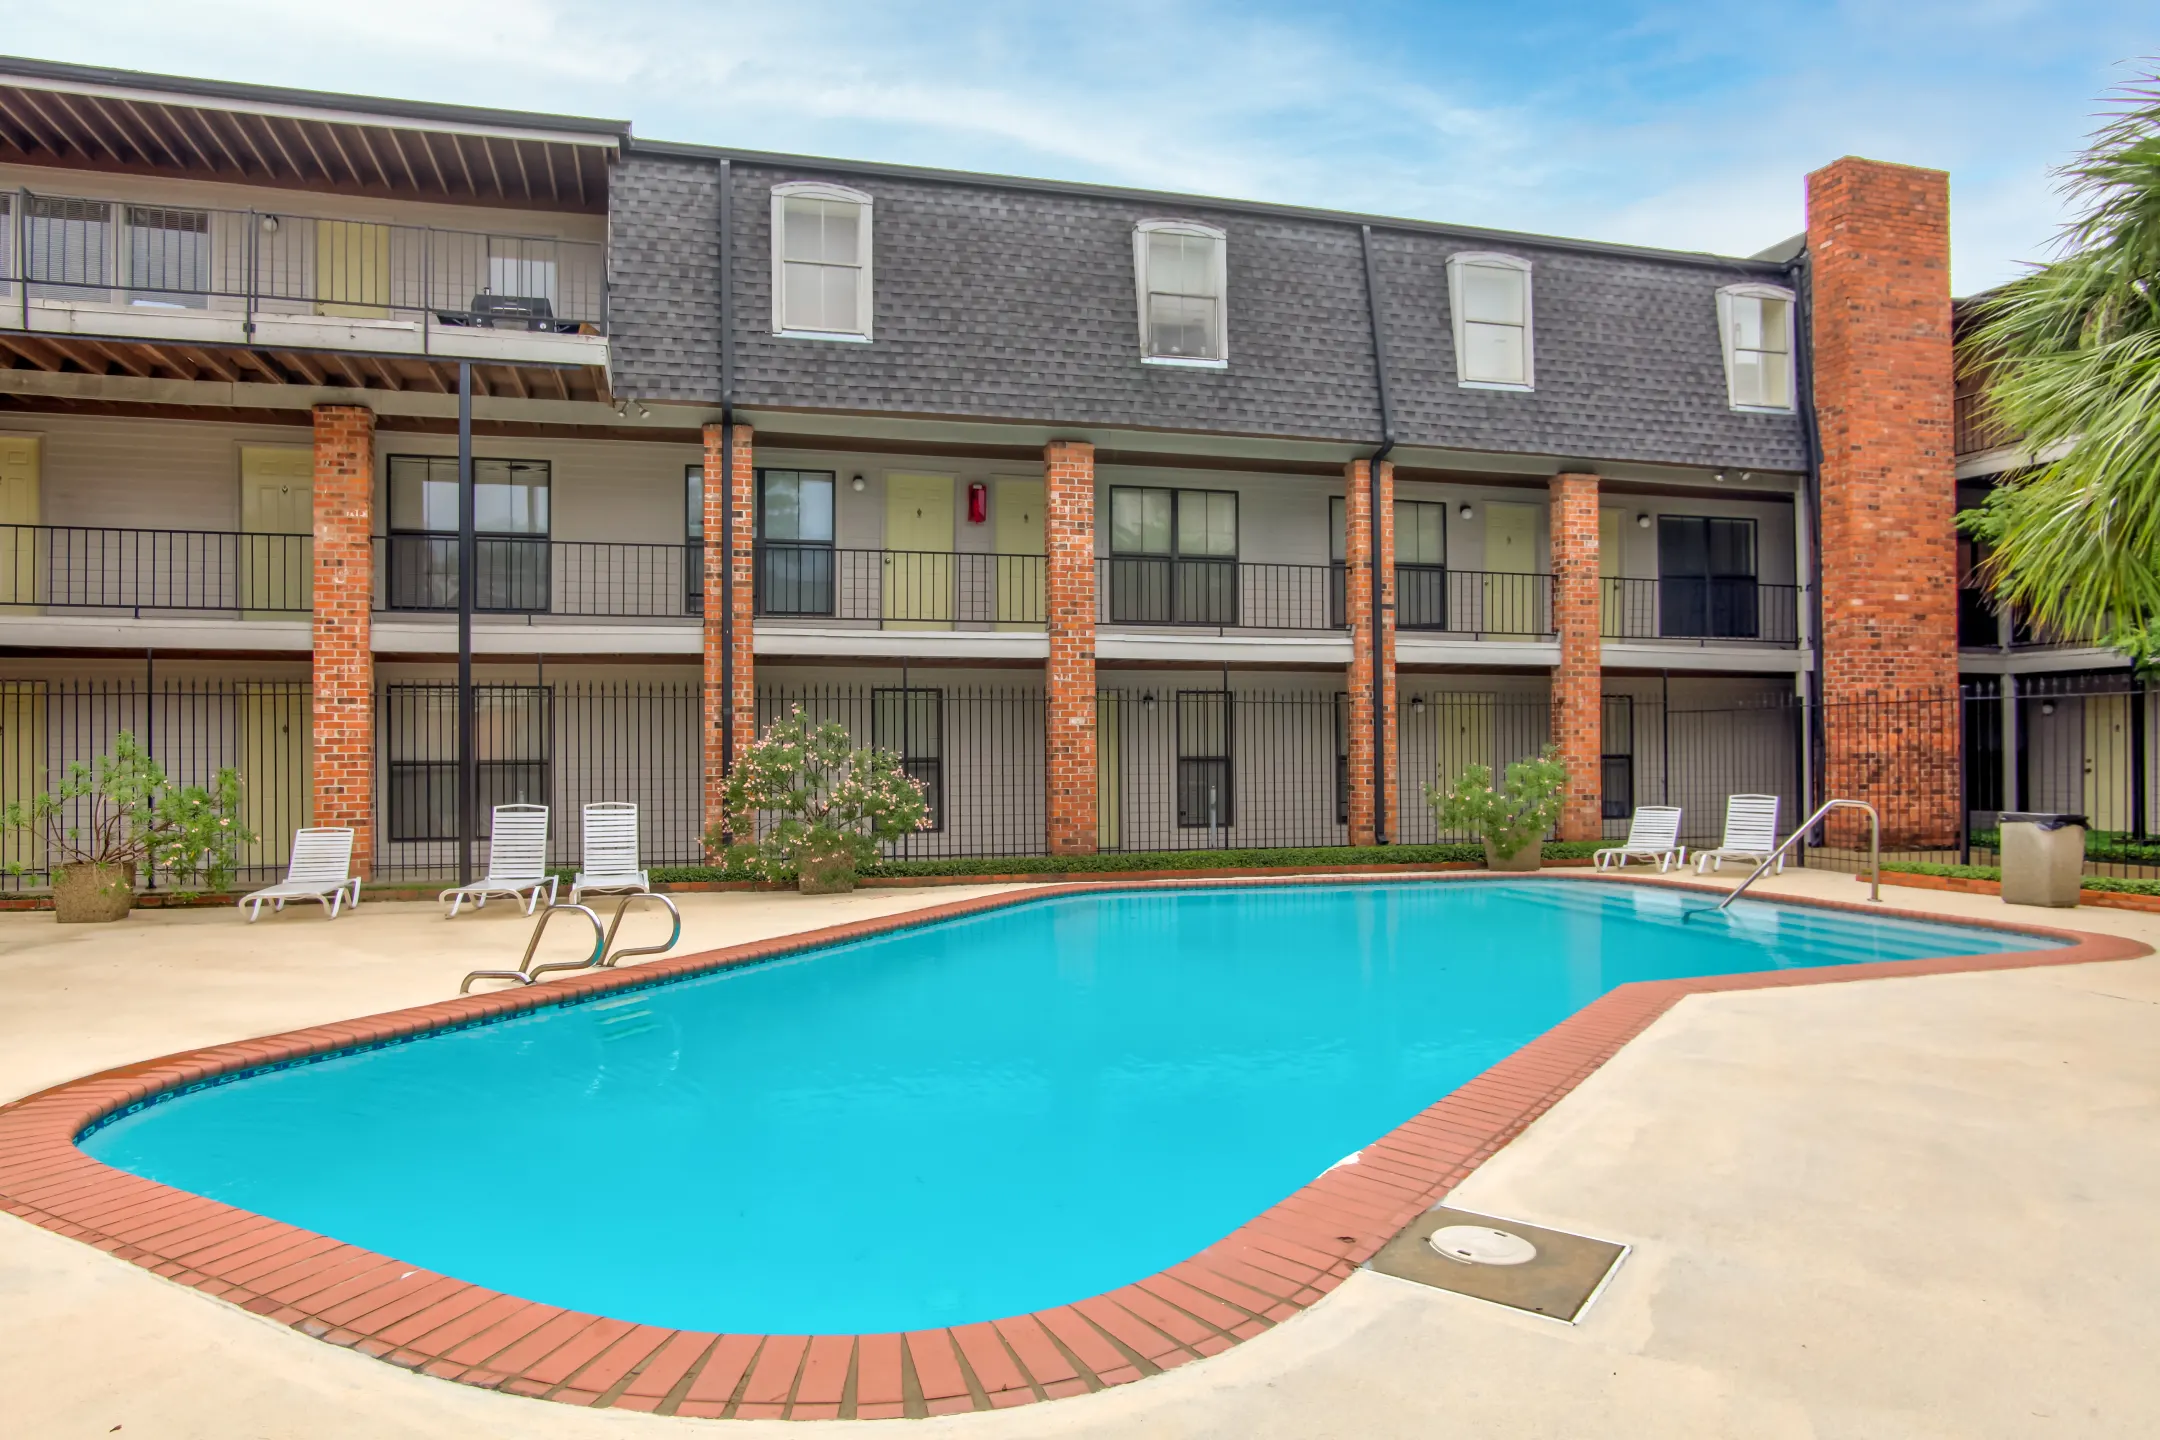 Pool - Cypress Trace Apartments - New Orleans, LA